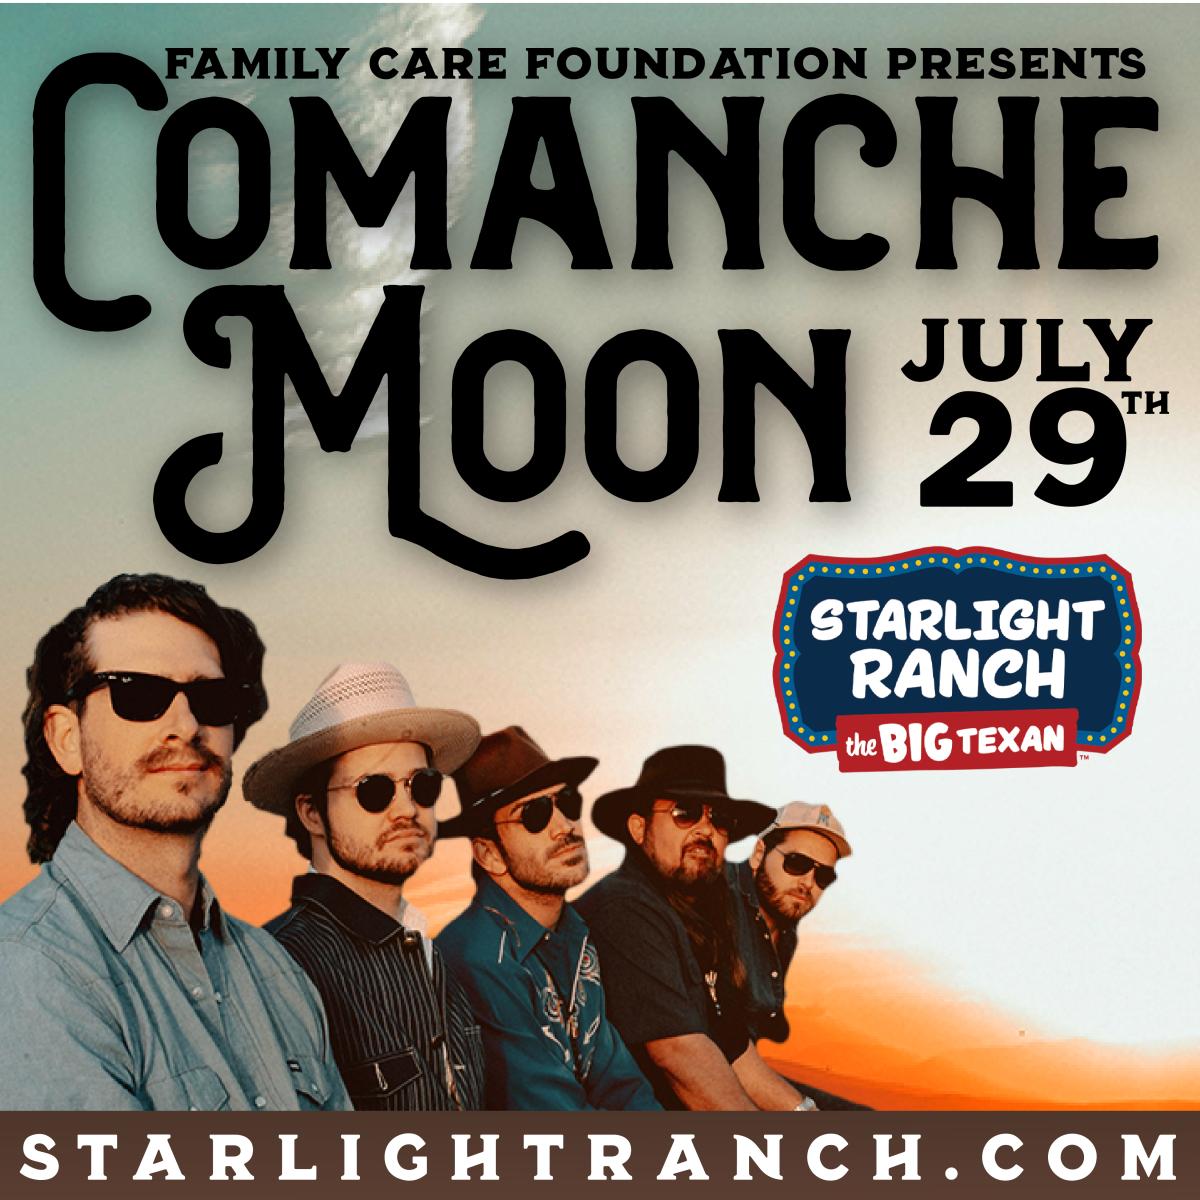 Comanche Moon LIVE at the Starlight Ranch - Benefiting The Family Care Foundation